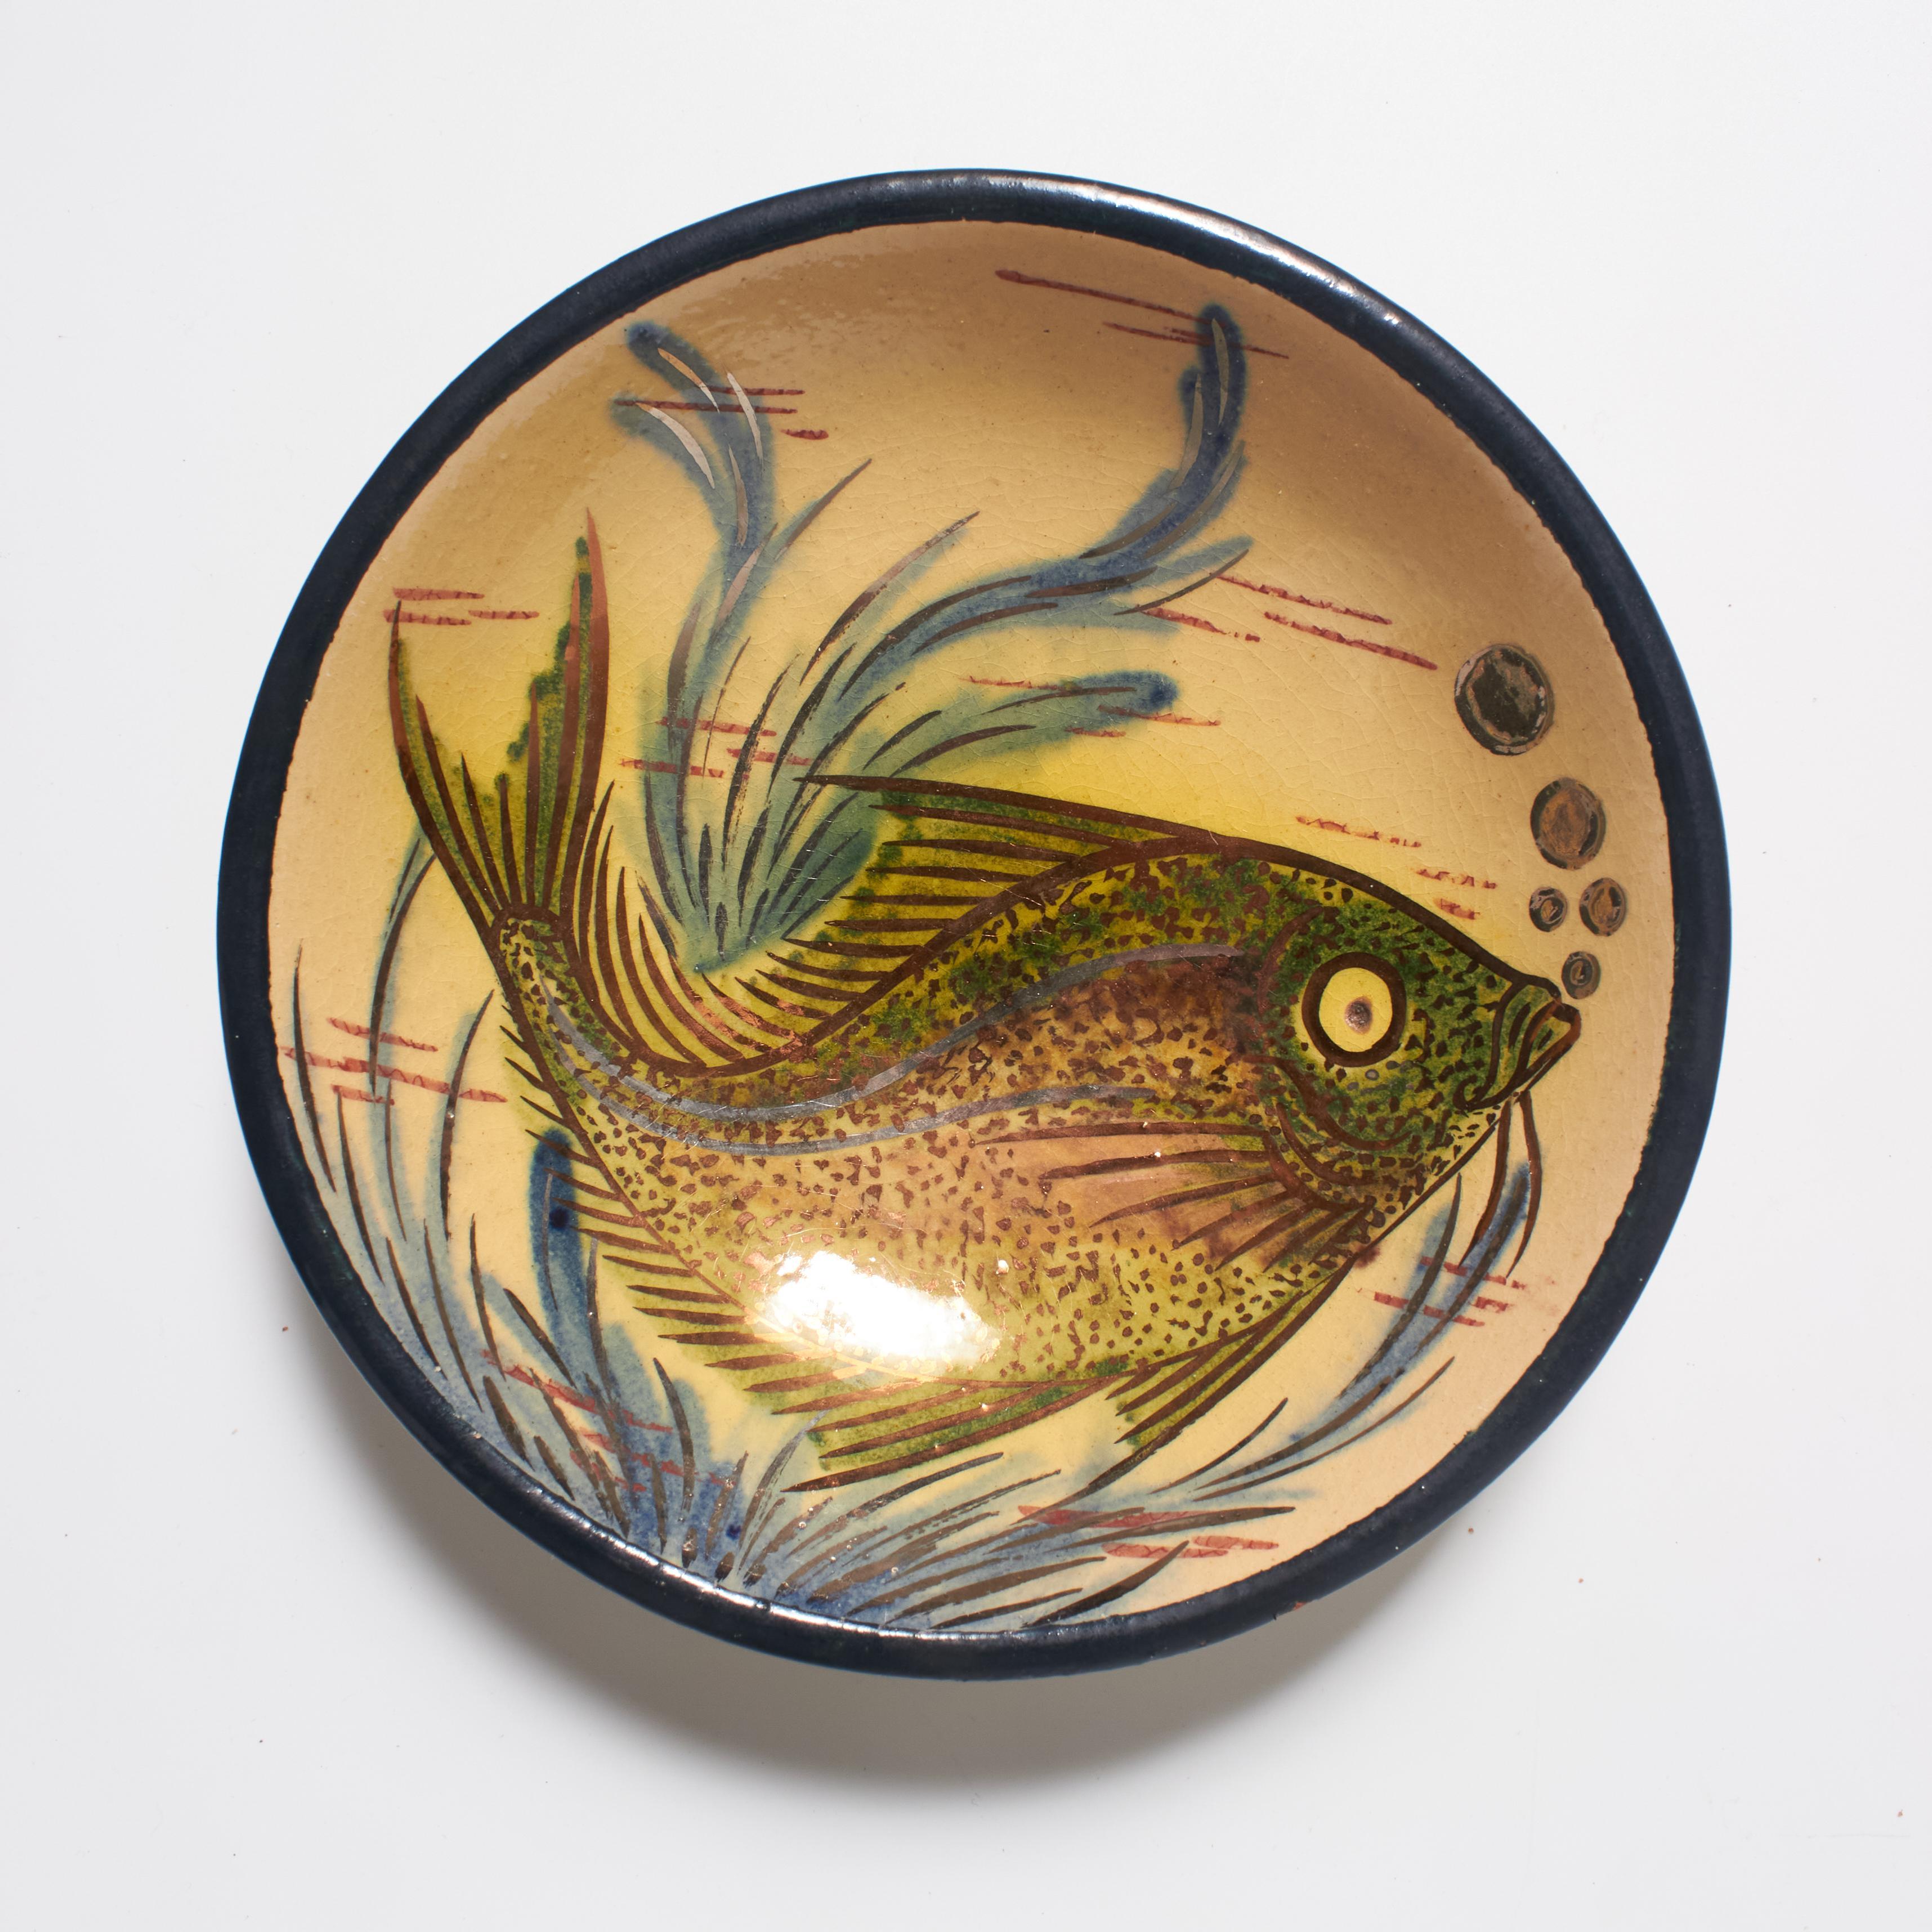 Mid-20th Century Pair of Vintage Hand-Painted Ceramic Plates by Catalan Artist Diaz Costa For Sale